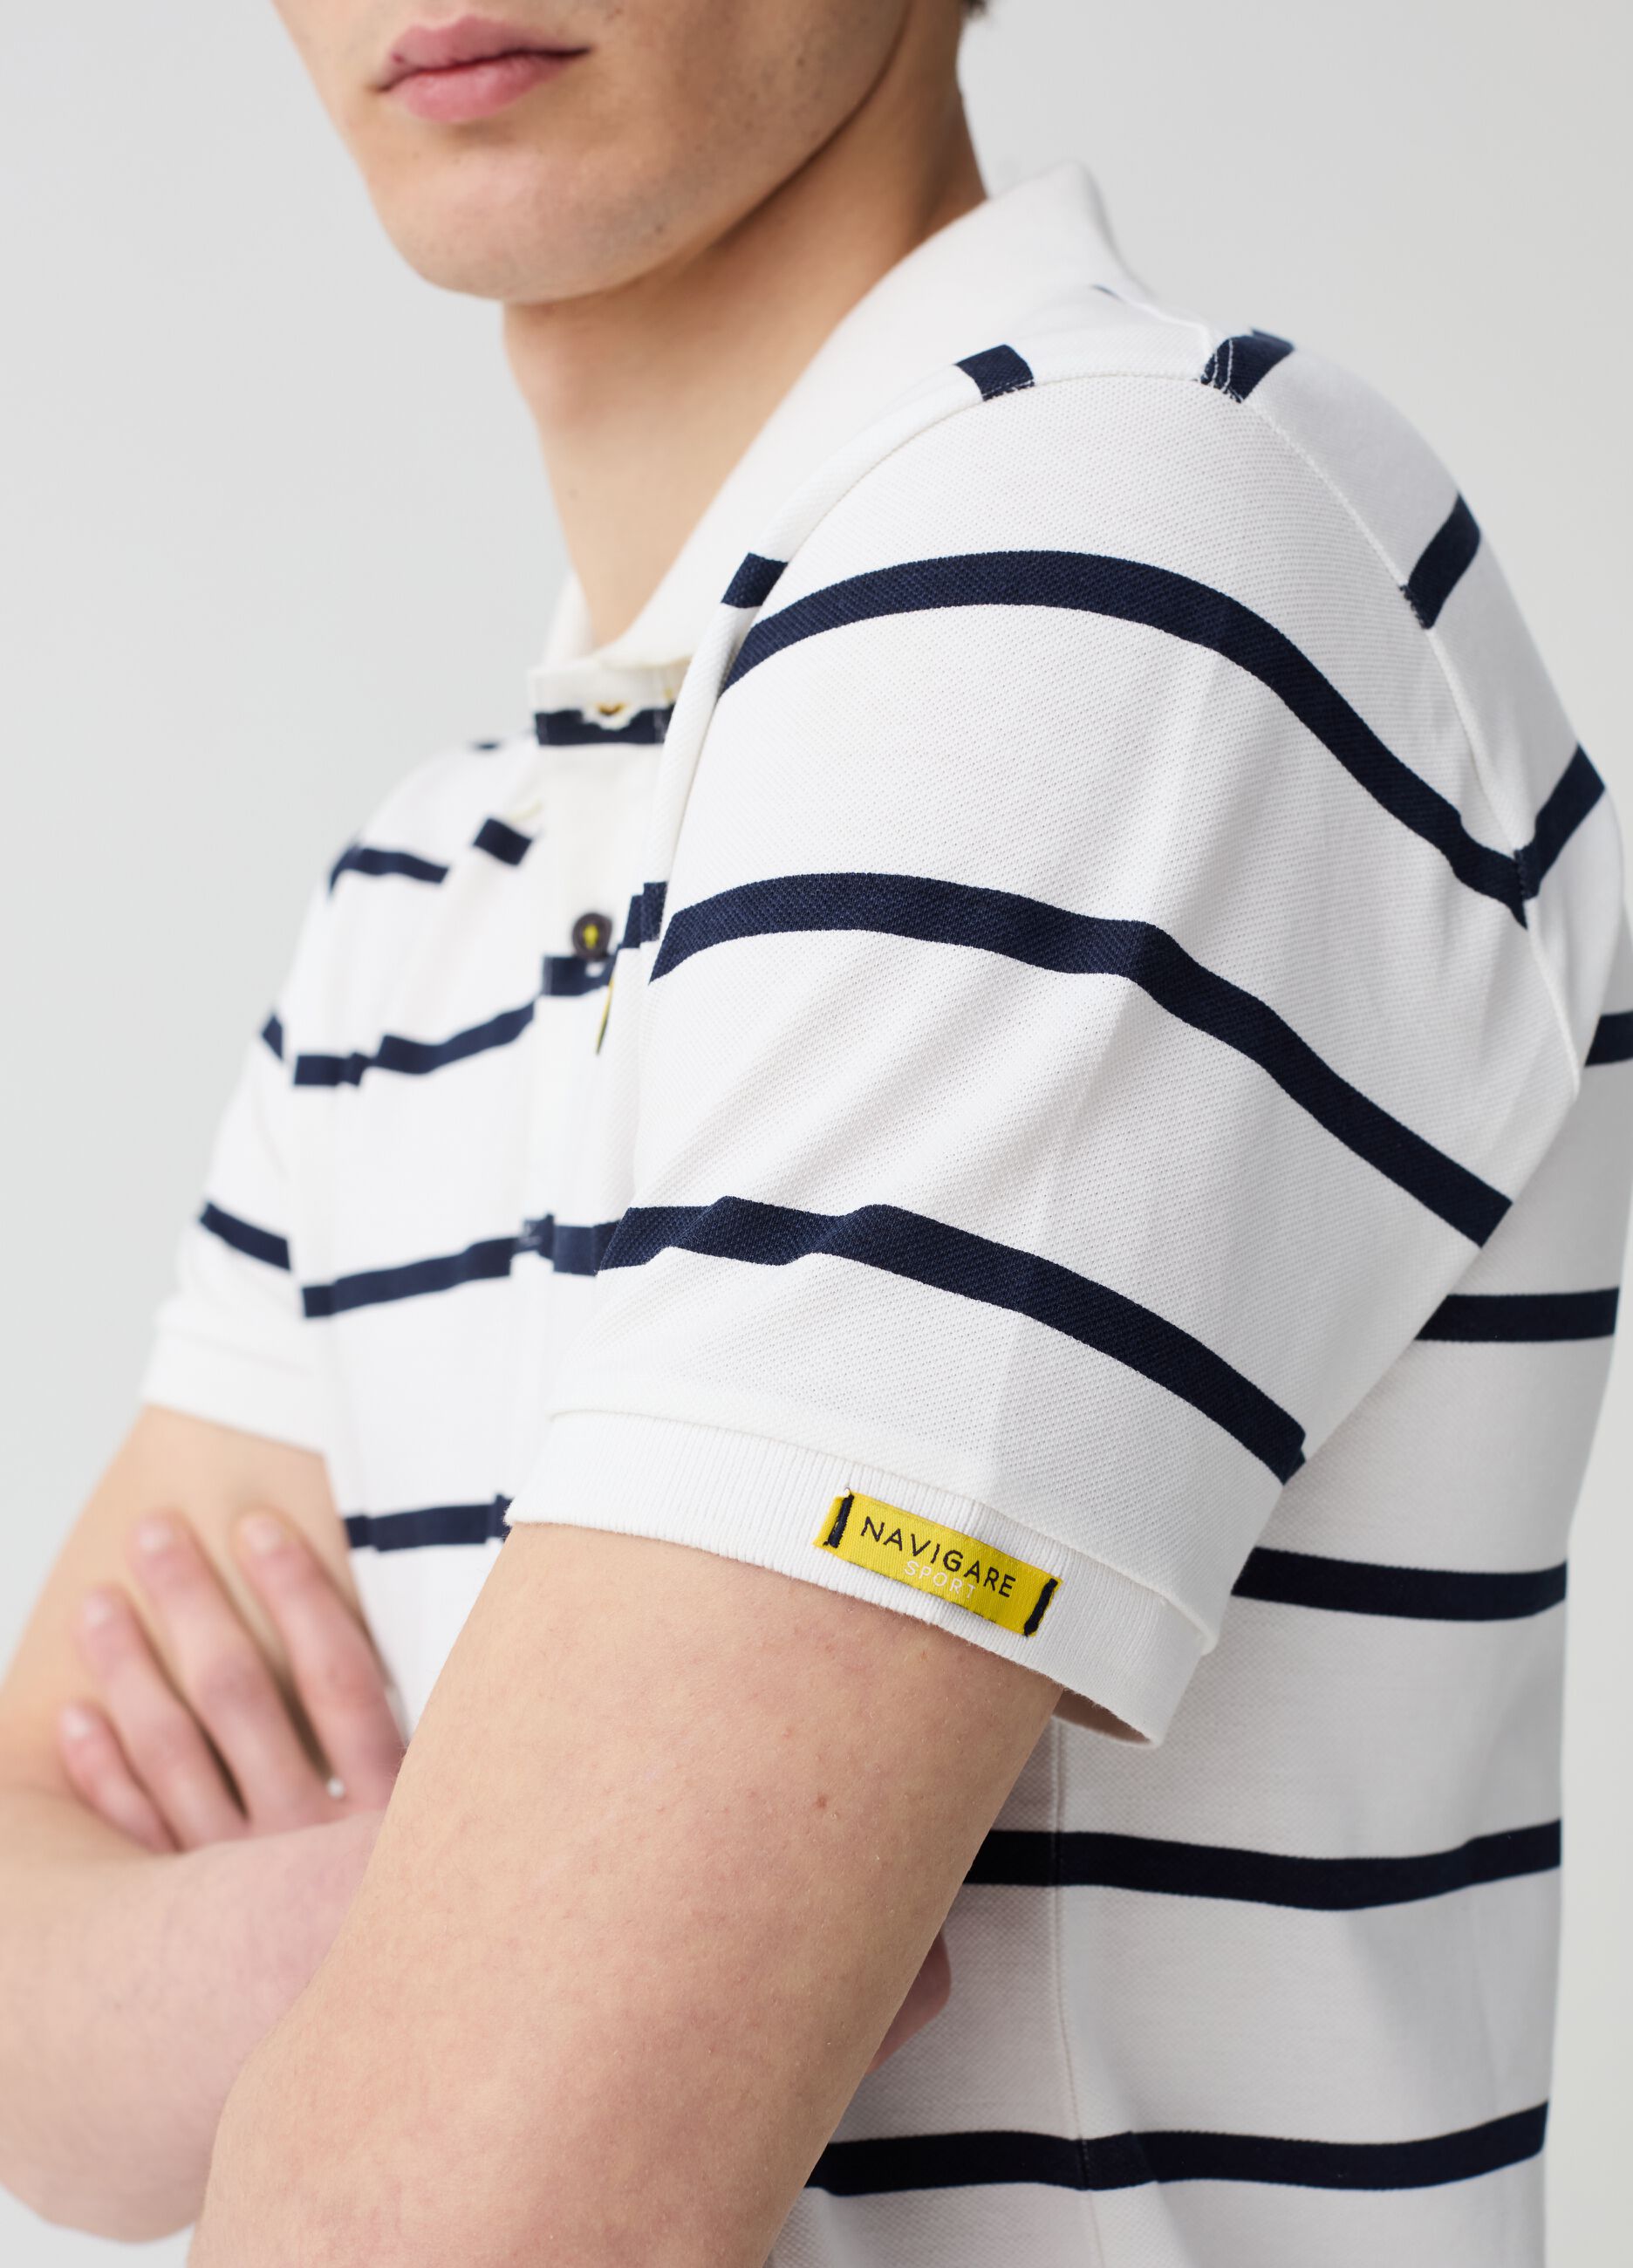 Navigare Sport polo shirt with stripes